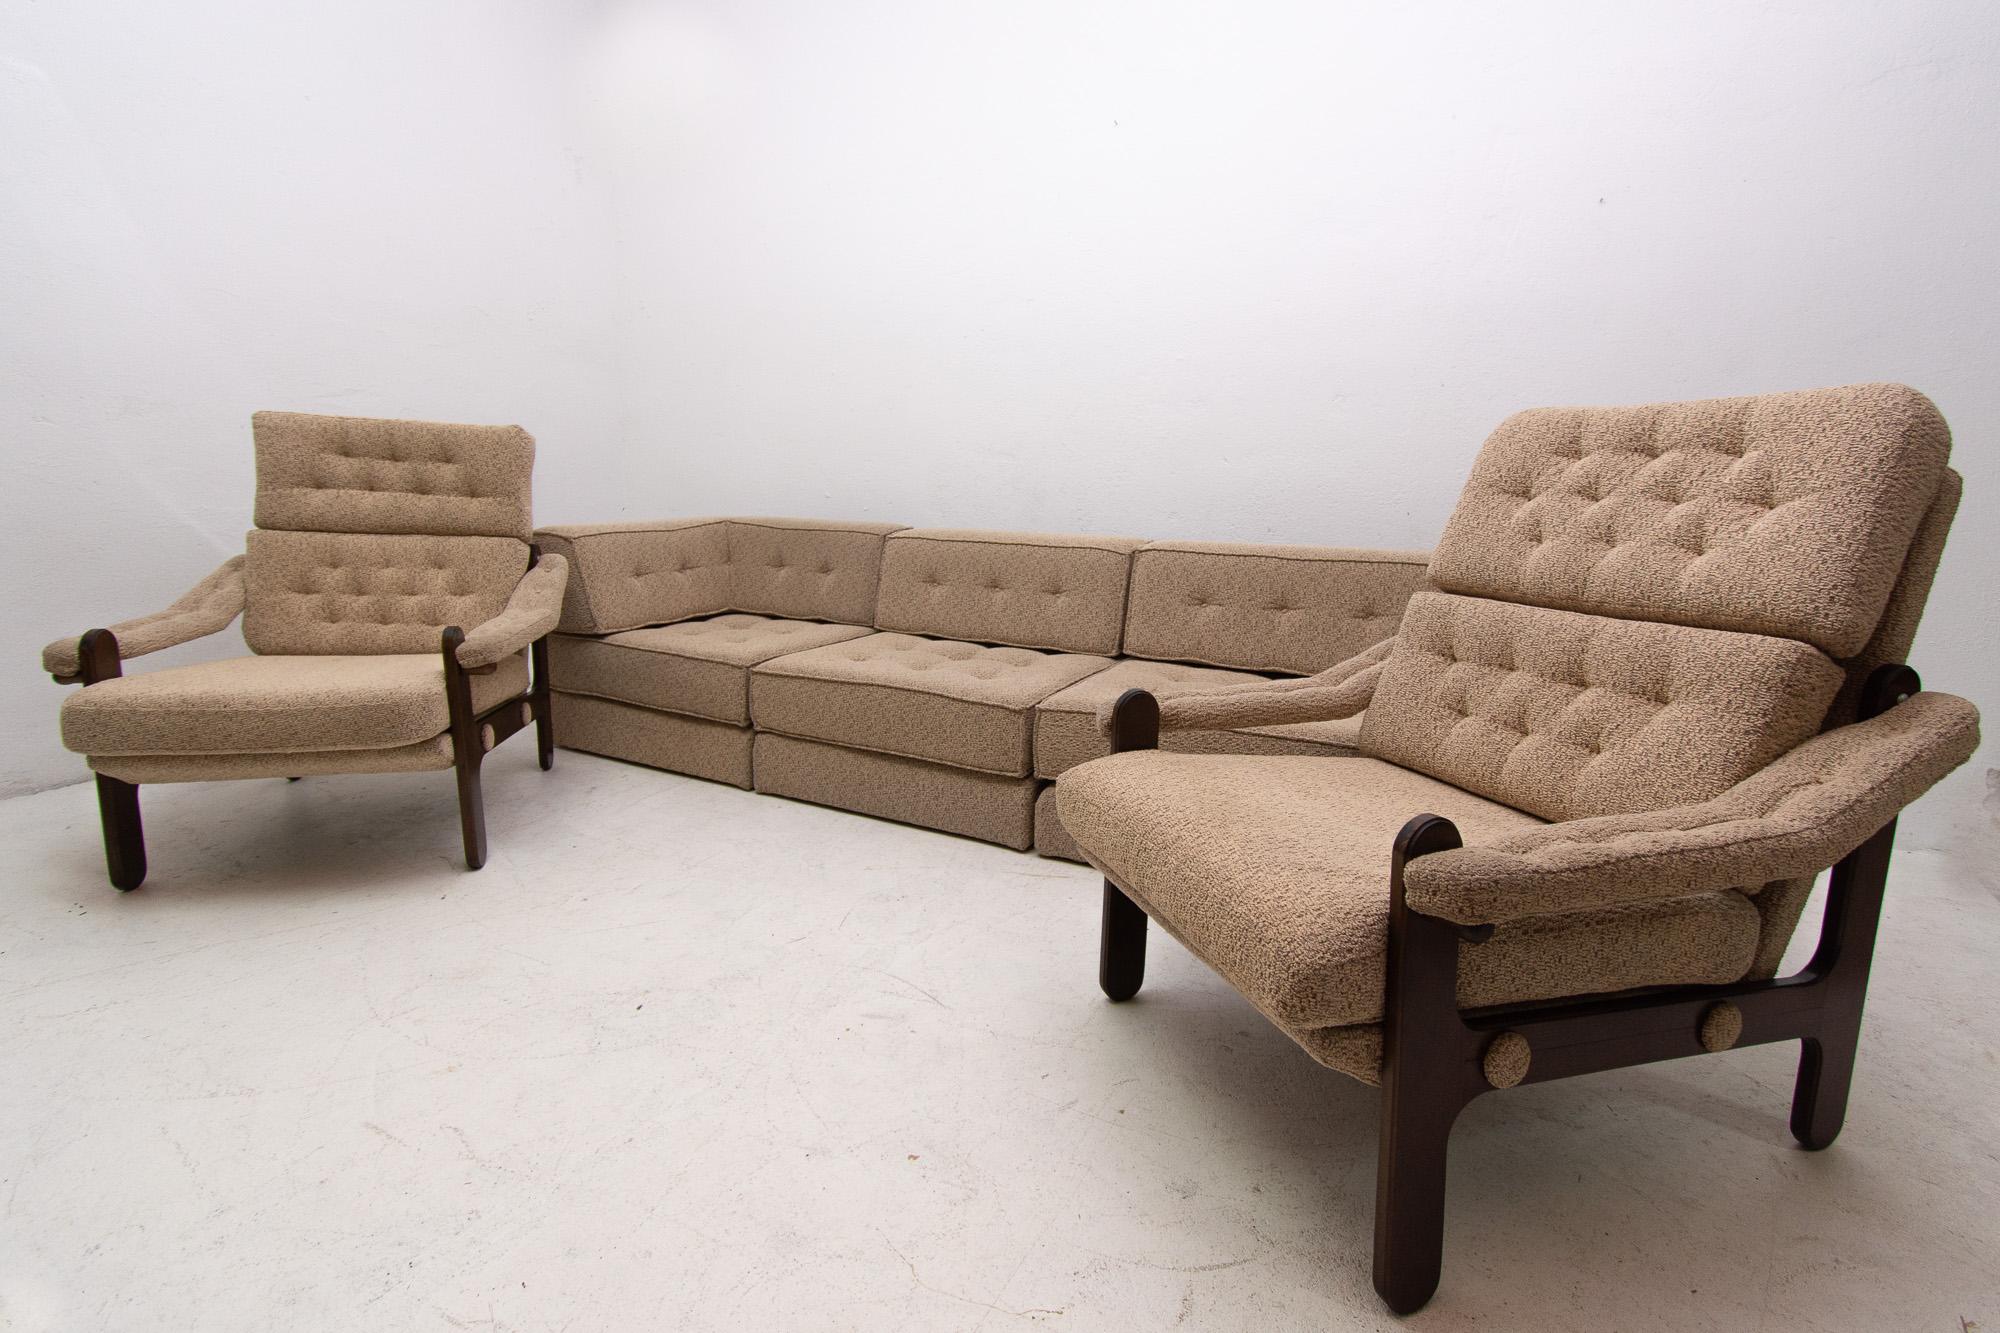 This lounge modular seating group was made in the 1980s in the former Czechoslovakia. Consists of one sofa and two armchairs. The set is upholstered in fabric. The structure is made of wood. The sofa can be divided into three separated seats. The